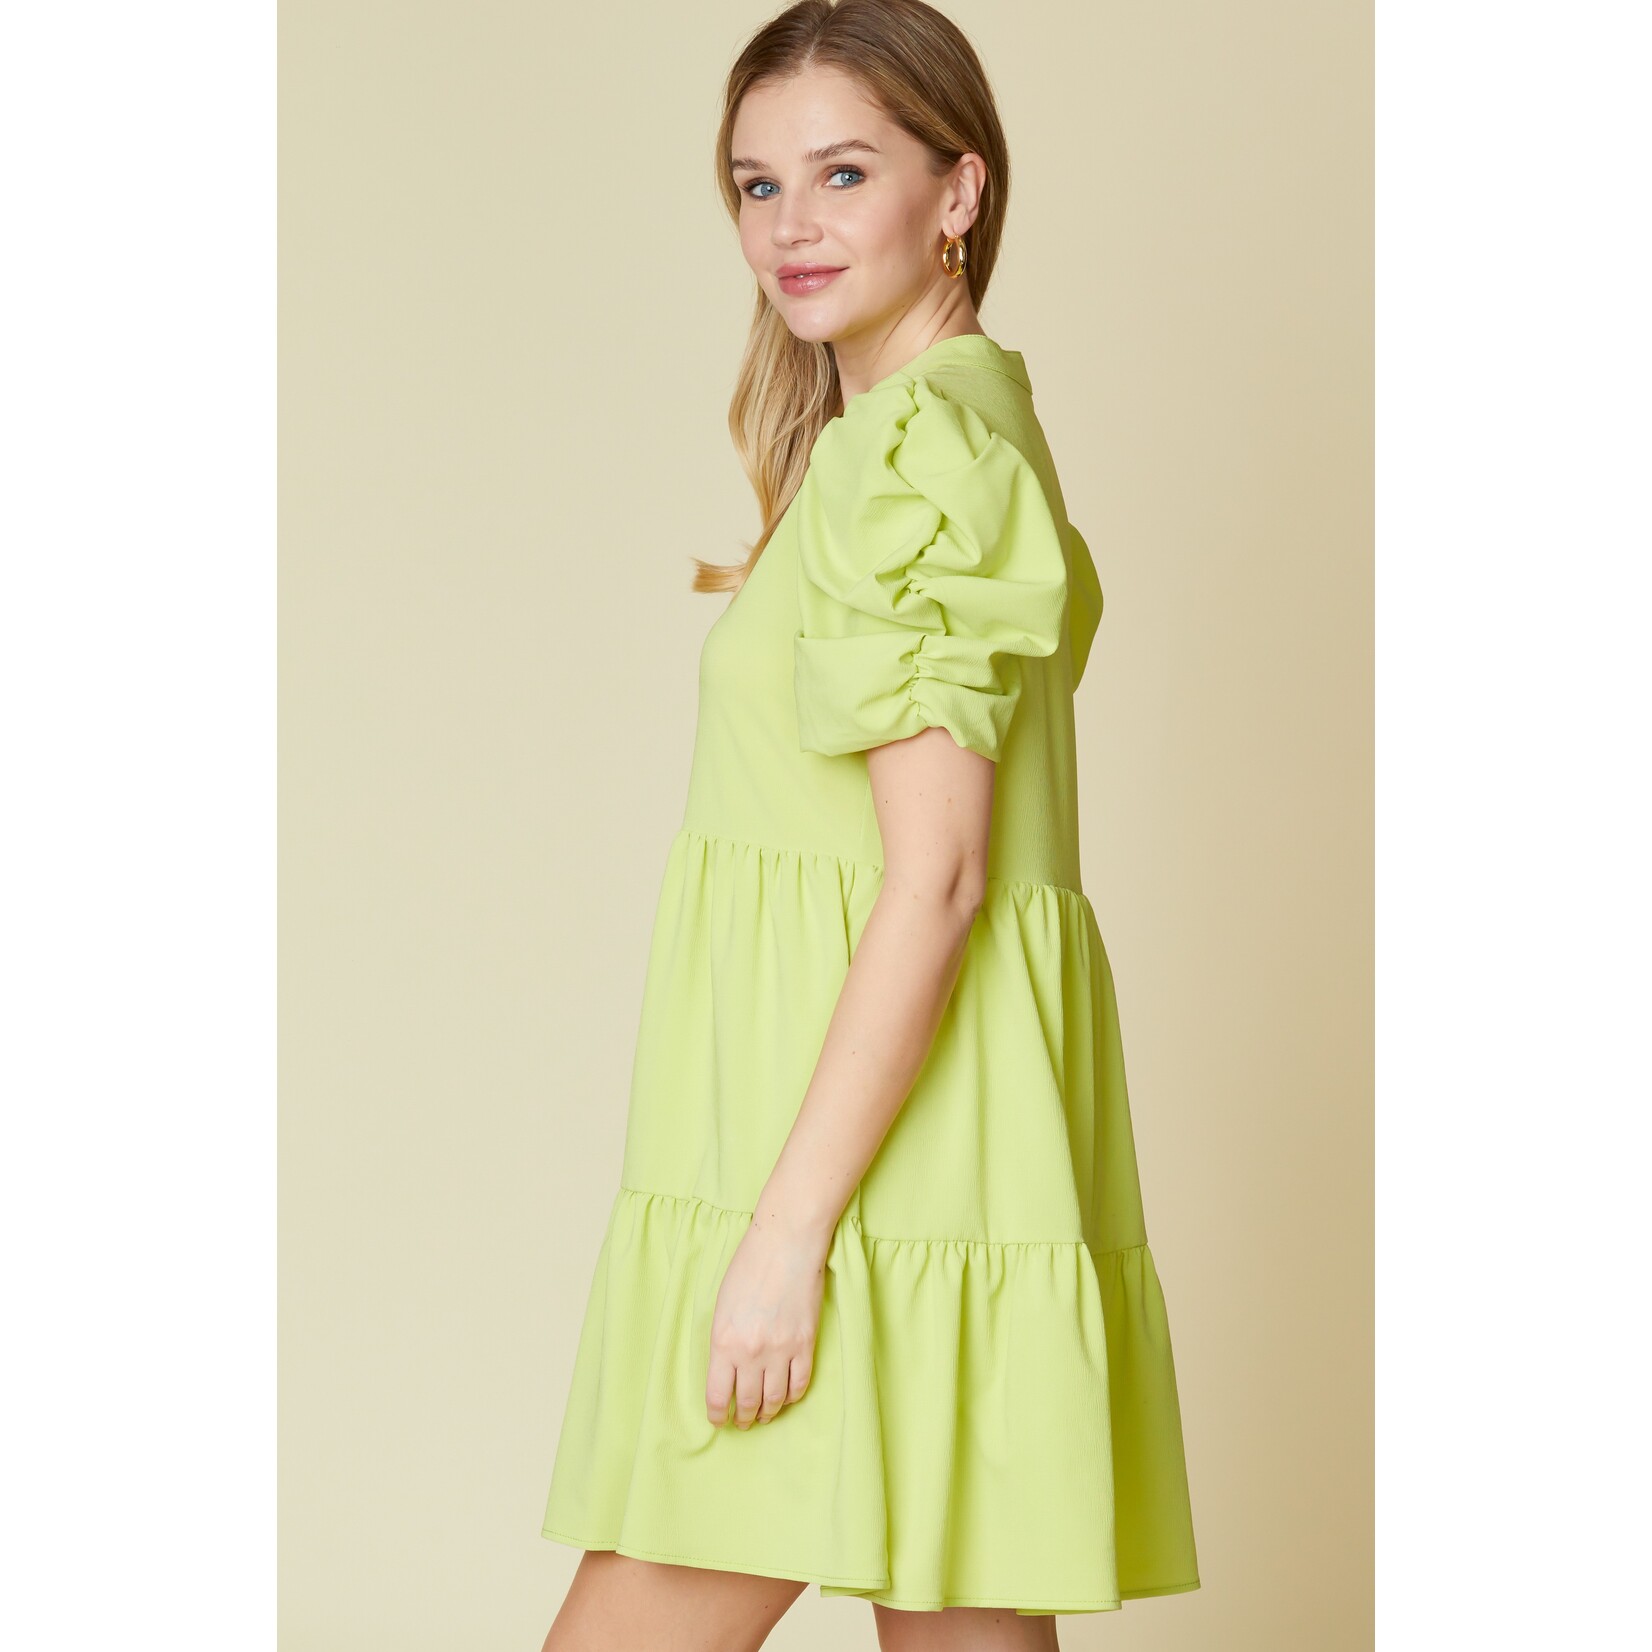 Beeson River Abigail Lime Baby Doll Dress